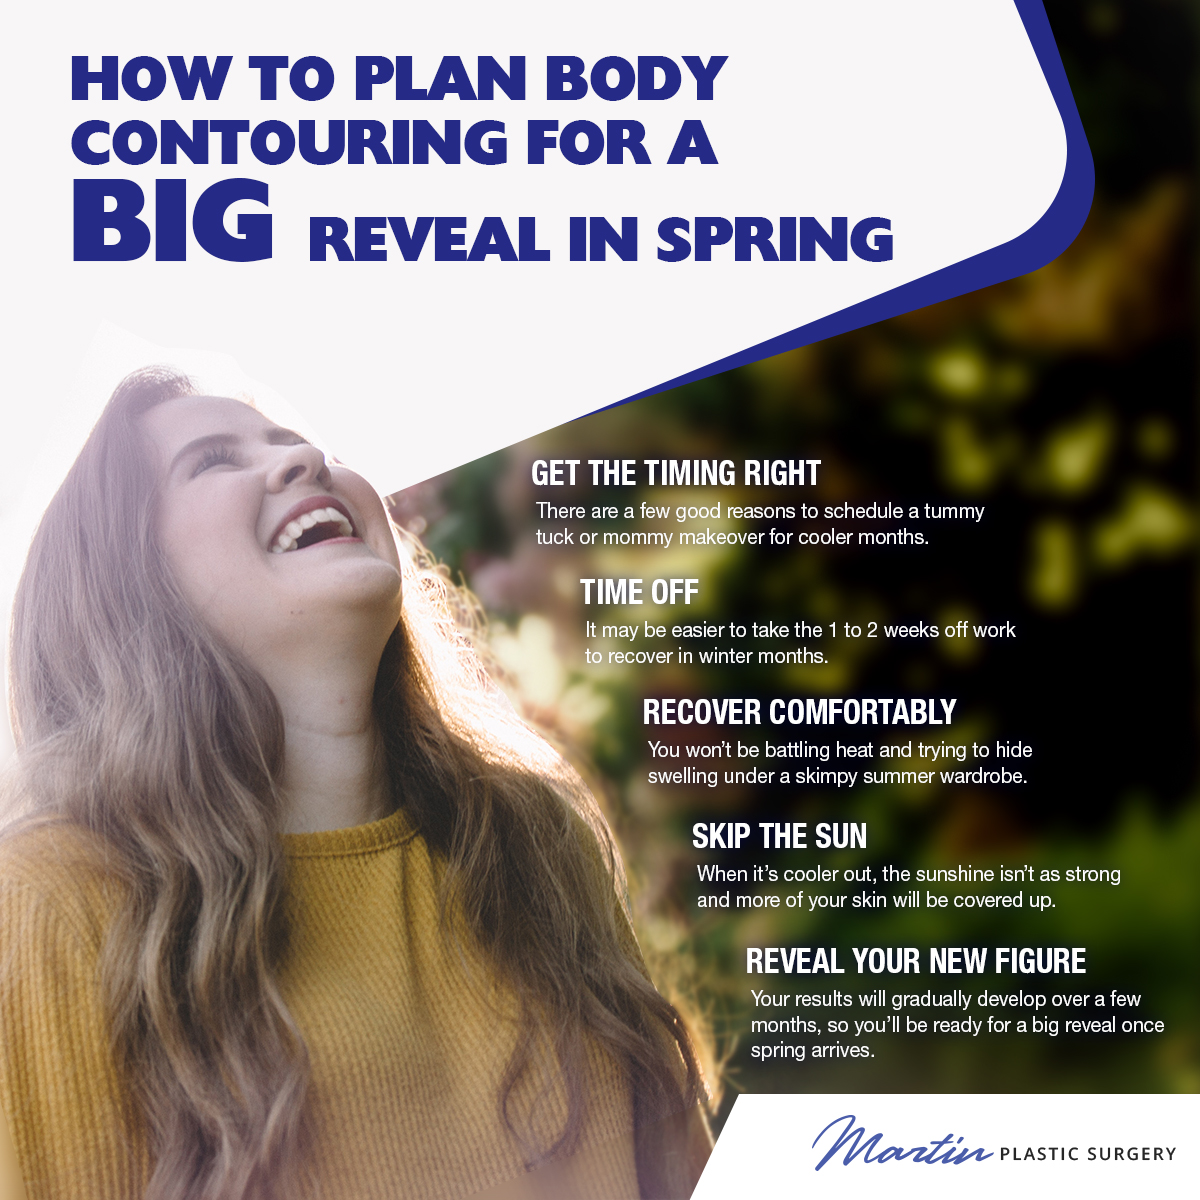 How To Plan Body Contouring For A Big Reveal In Summer [Infographic] img 1